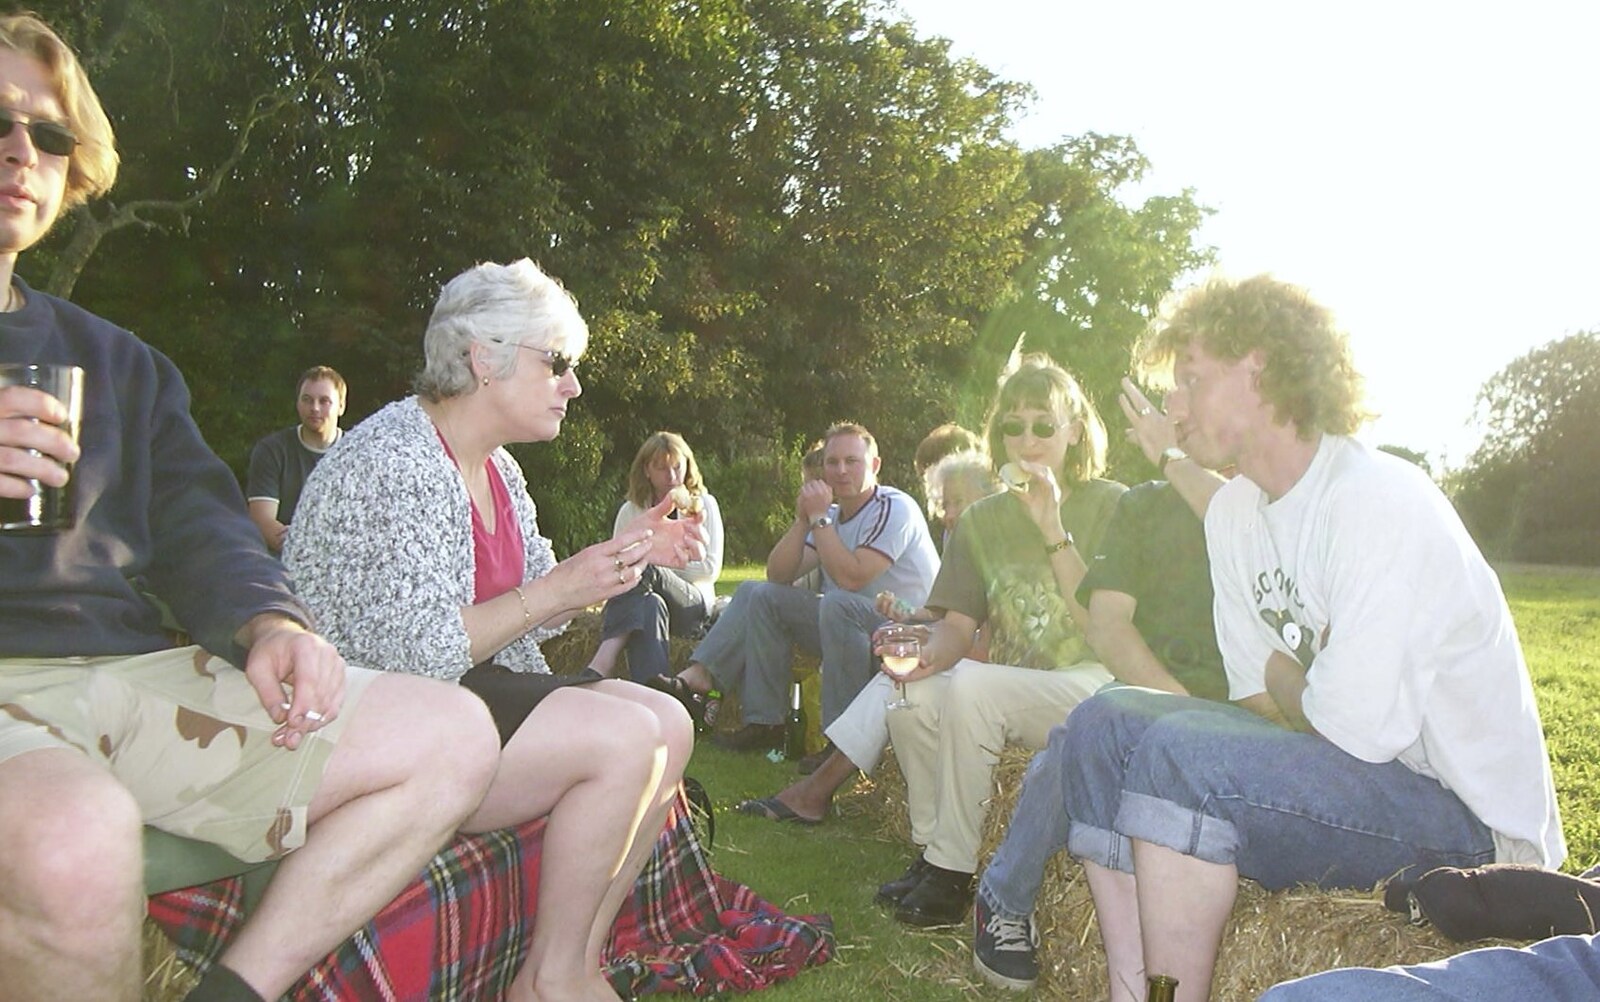 Conversation in the evening sun from DH's BSCC Barbeque, The Old Post Office, Brome, Suffolk - 7th July 2002